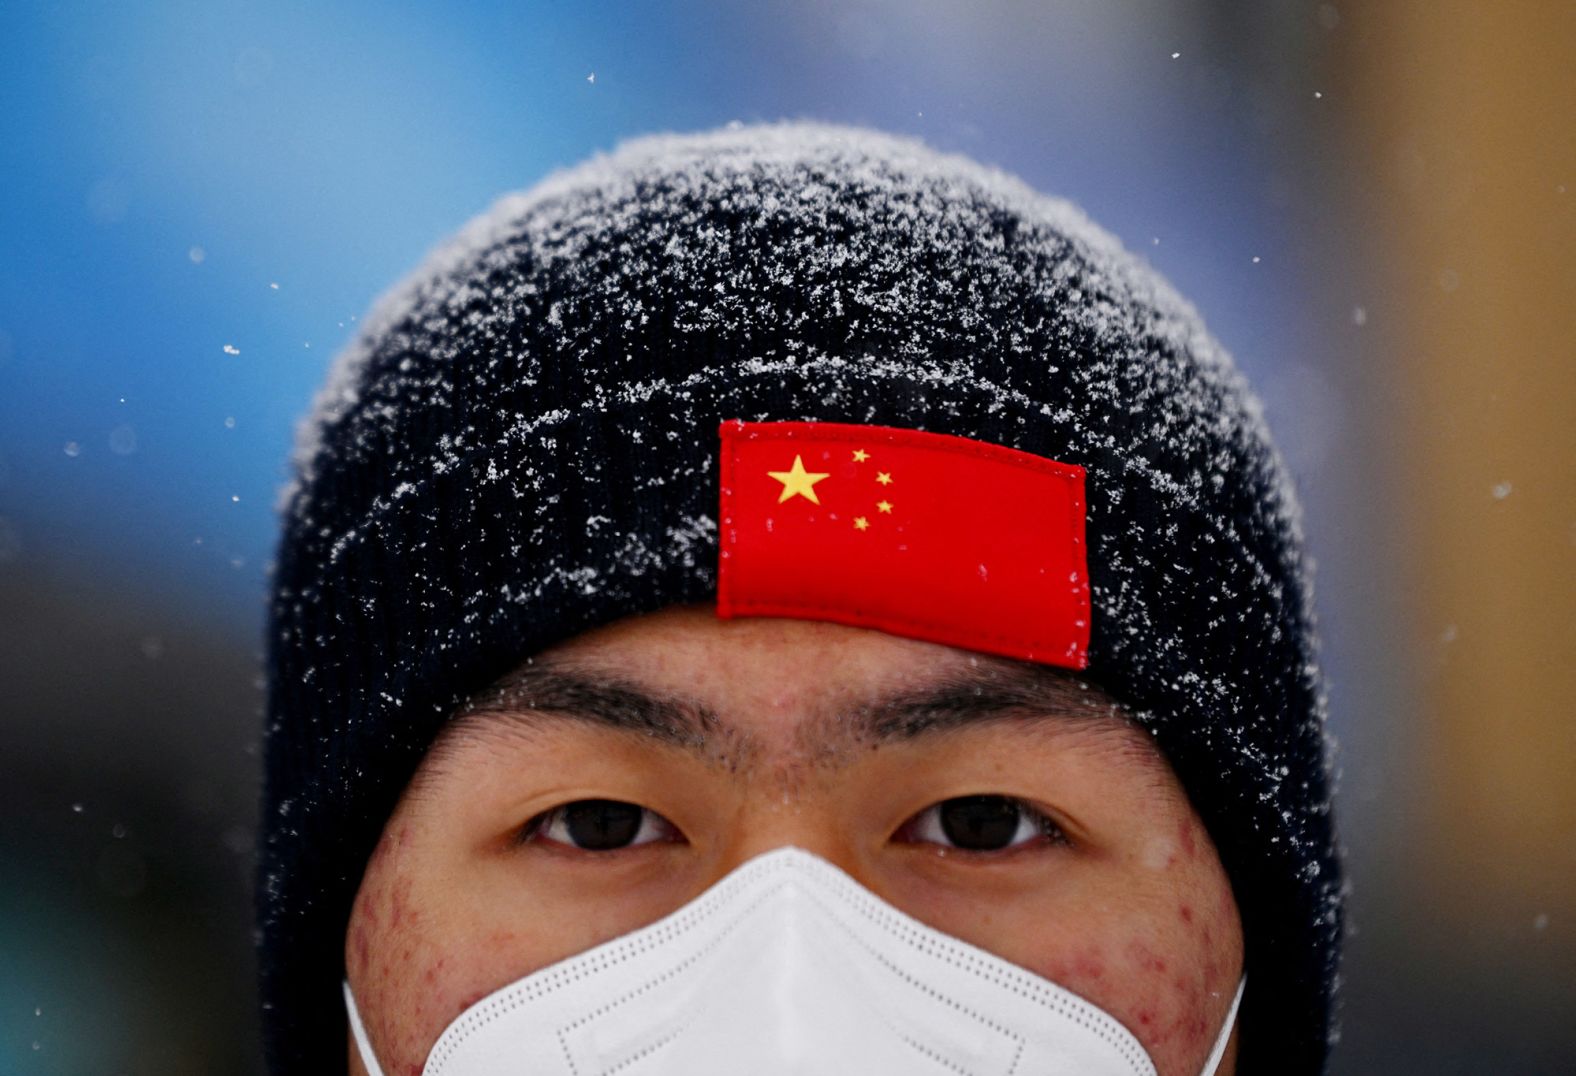 A man attends a freestyle skiing event that was postponed because of <a href="index.php?page=&url=https%3A%2F%2Fwww.cnn.com%2Fworld%2Flive-news%2Fbeijing-winter-olympics-02-13-22-spt%2Fh_79912fabddc27a4d4b7d201f61fd125a" target="_blank">poor weather conditions.</a>